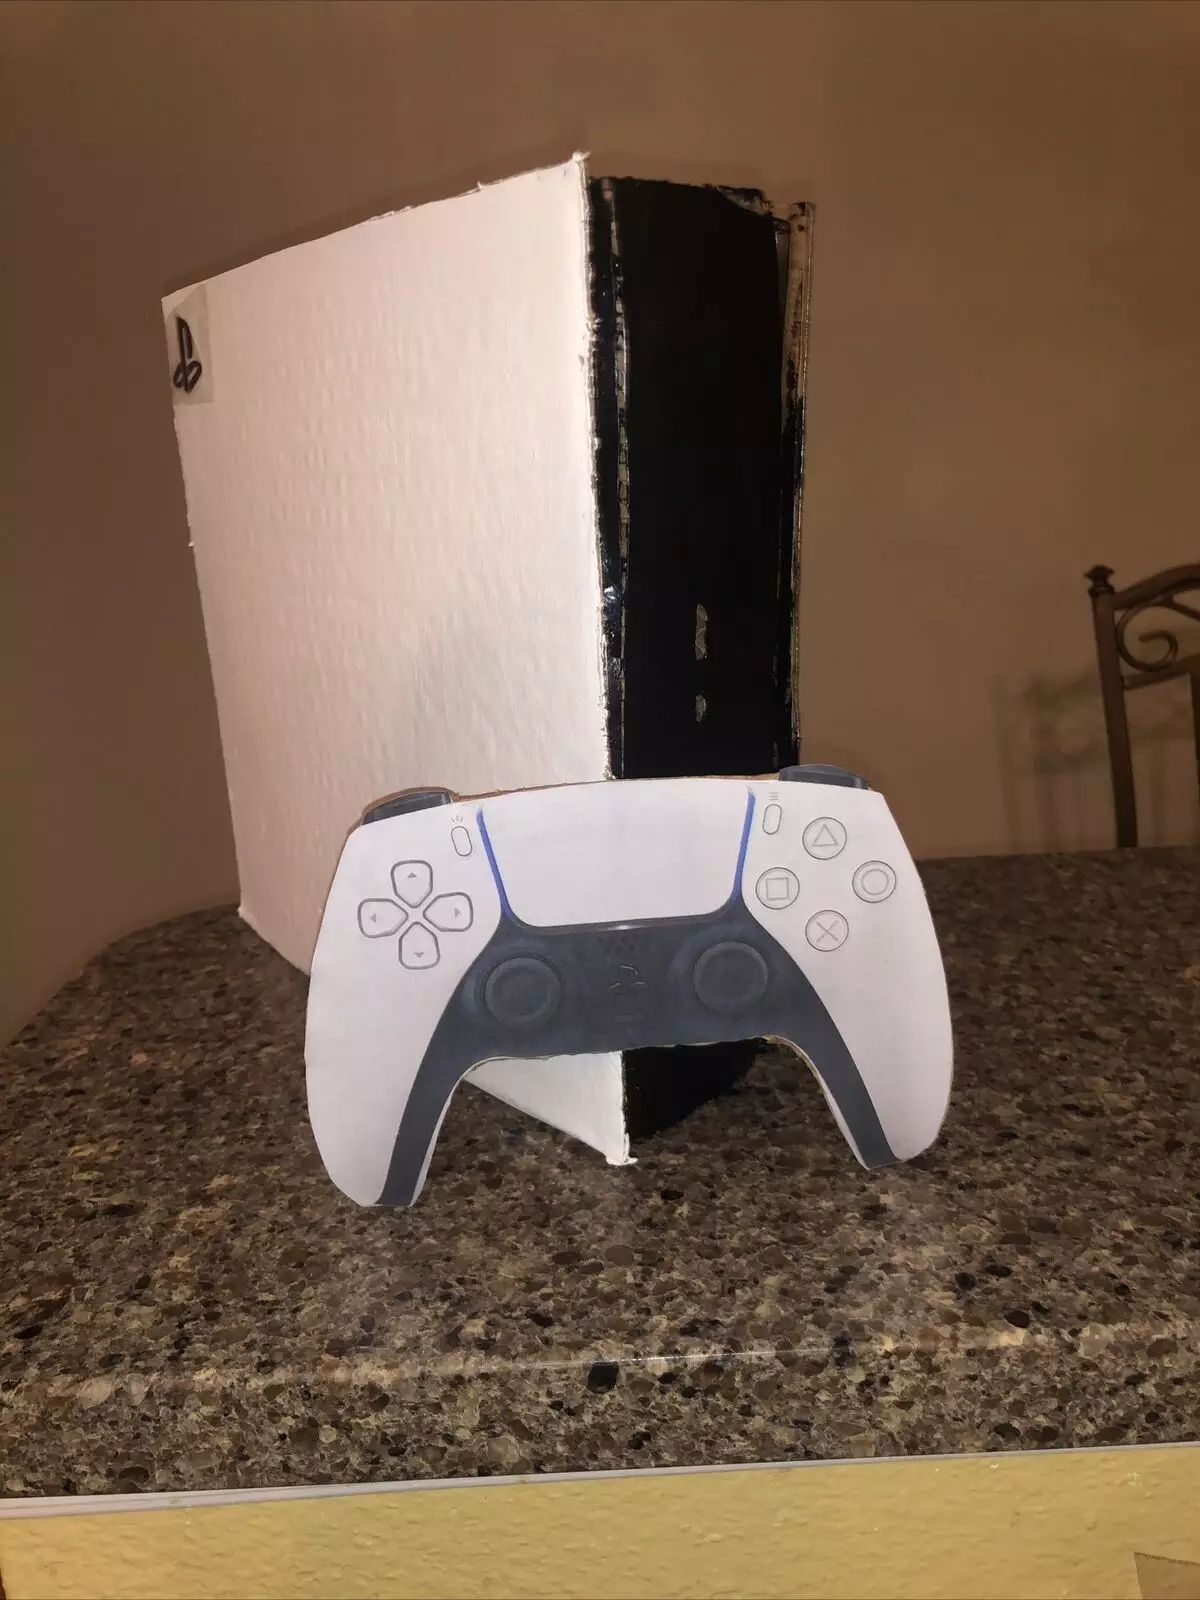 The cardboard PS5 with its cardboard controller /